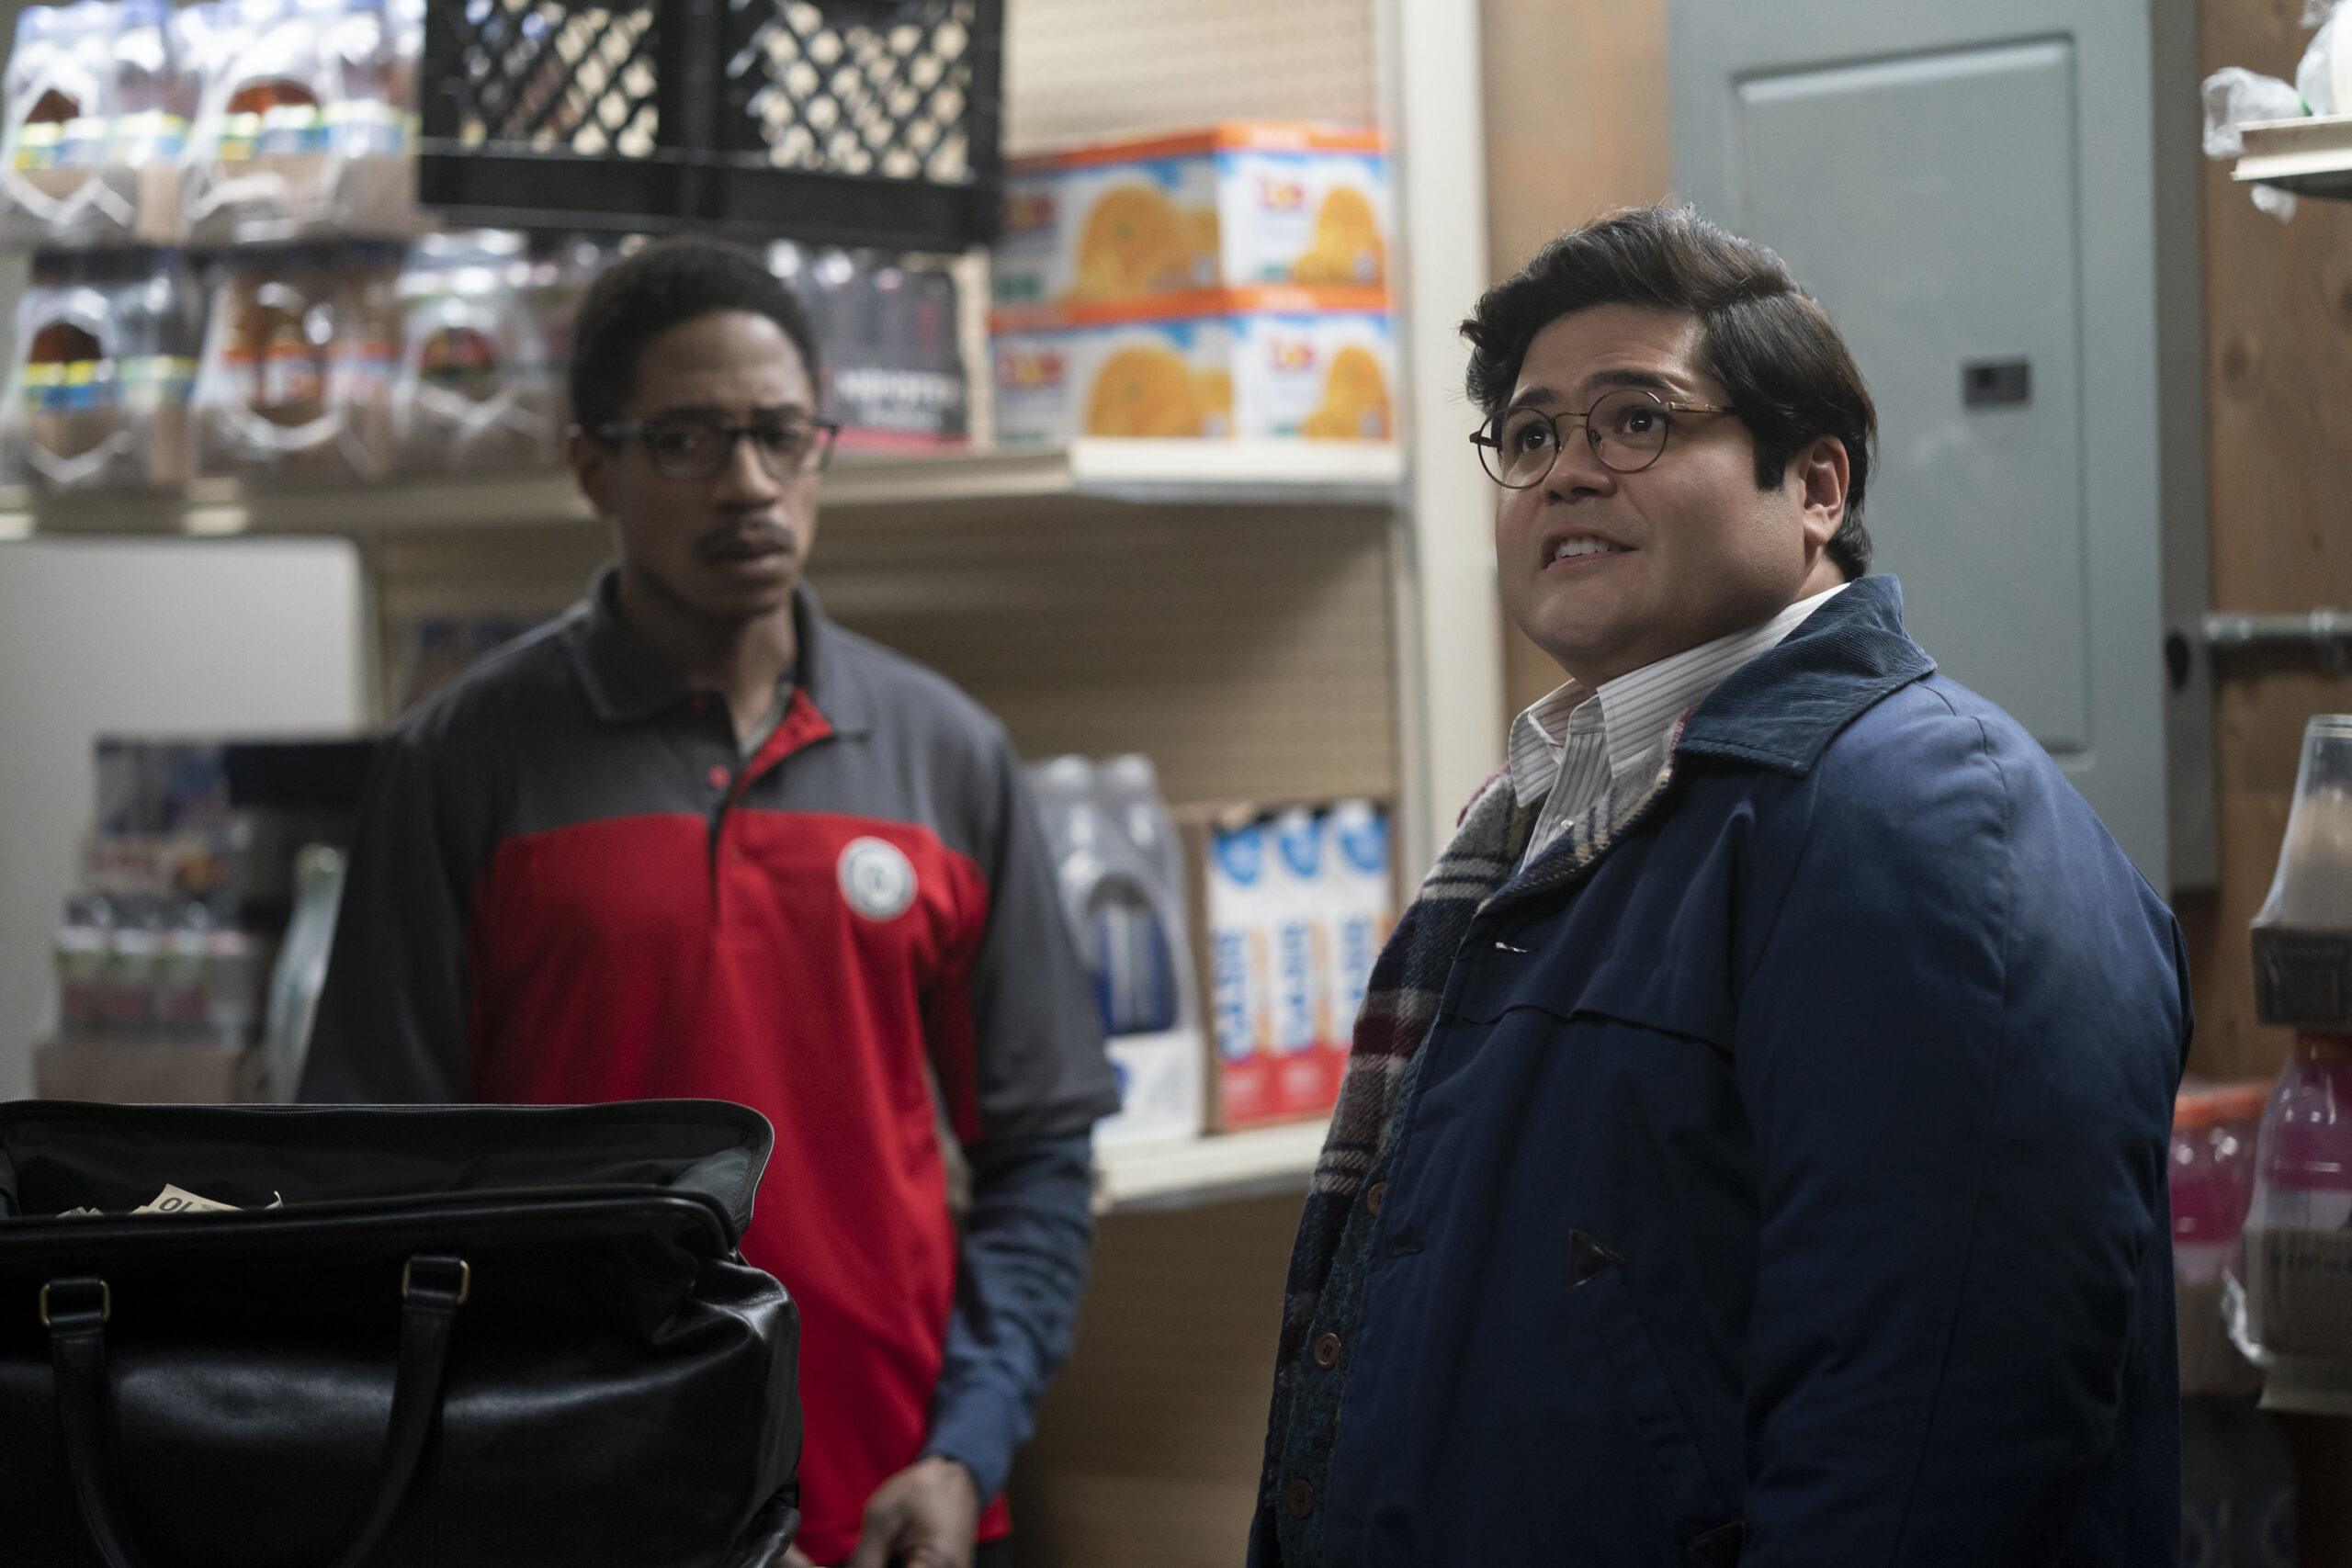 Chris Sandiford and Harvey Guillen in in FX Networks' What We Do in the Shadows Season 5 Episode 1